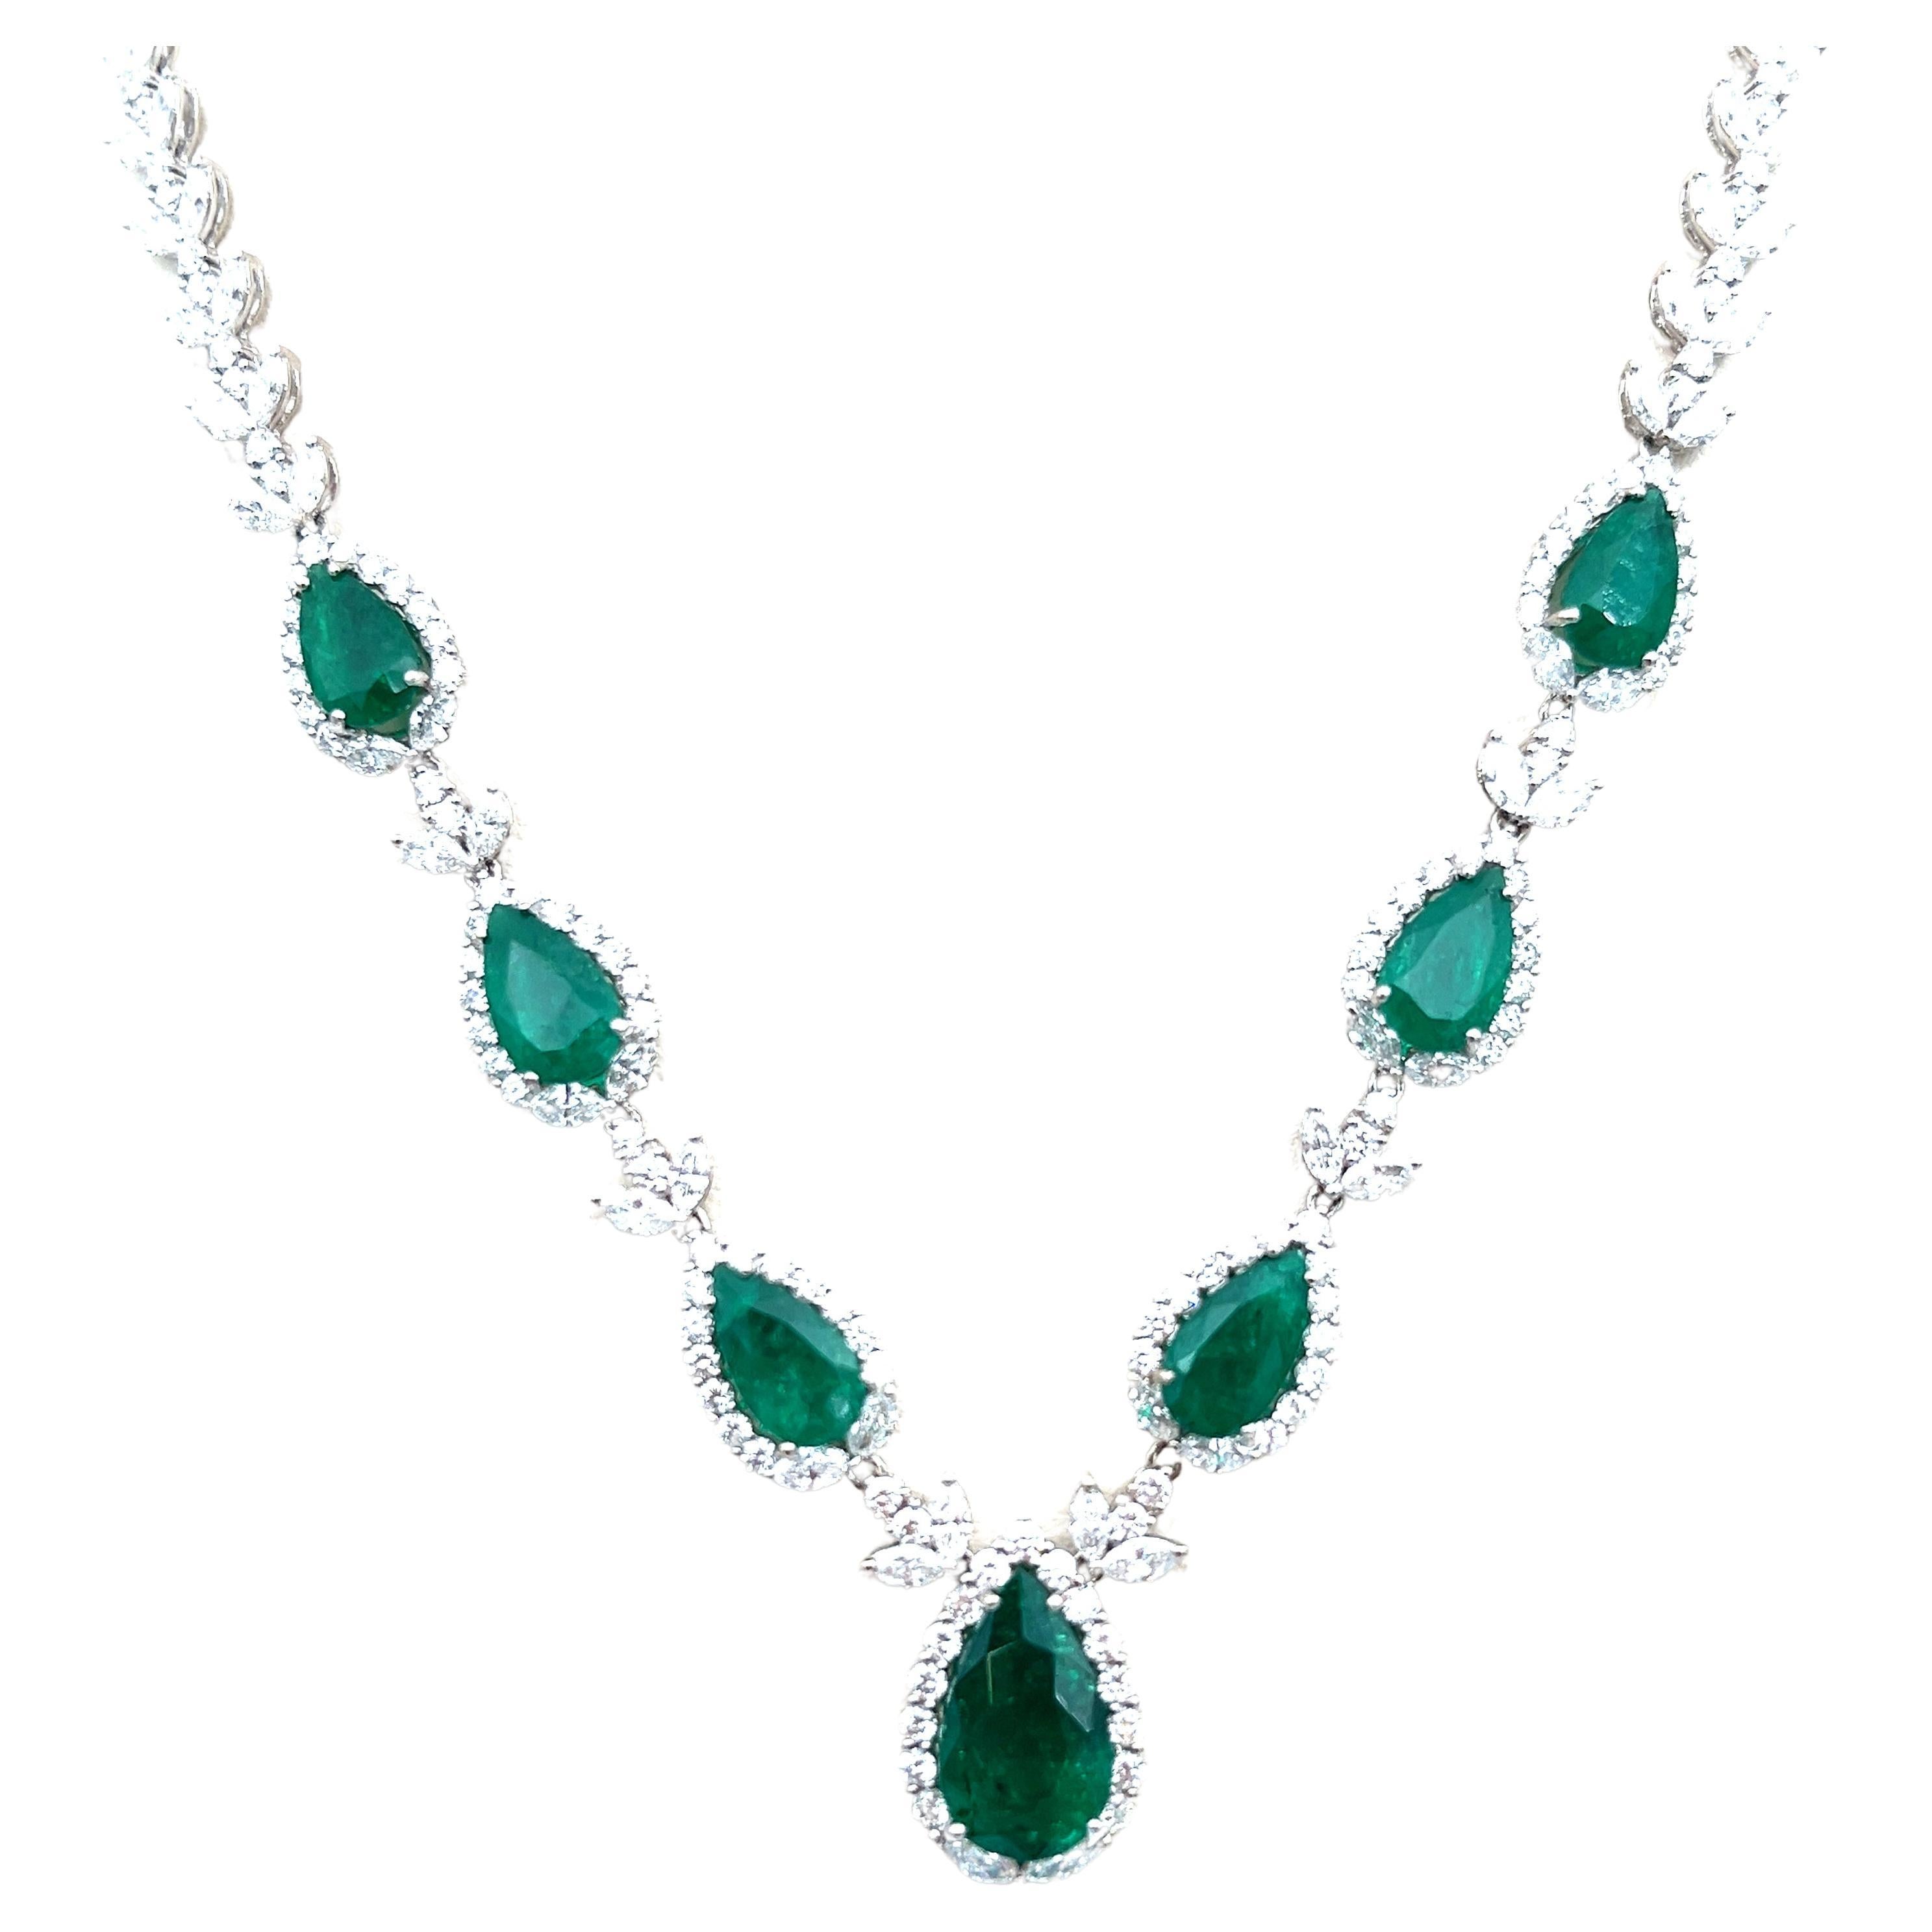 Check out this one-of-a-kind emerald necklace! The necklace features 7 natural Colombian emeralds weighing 10.25 ct and round brilliant cut diamonds weighing 17.3 ct set in 18k white gold. A gorgeous showstopper!!